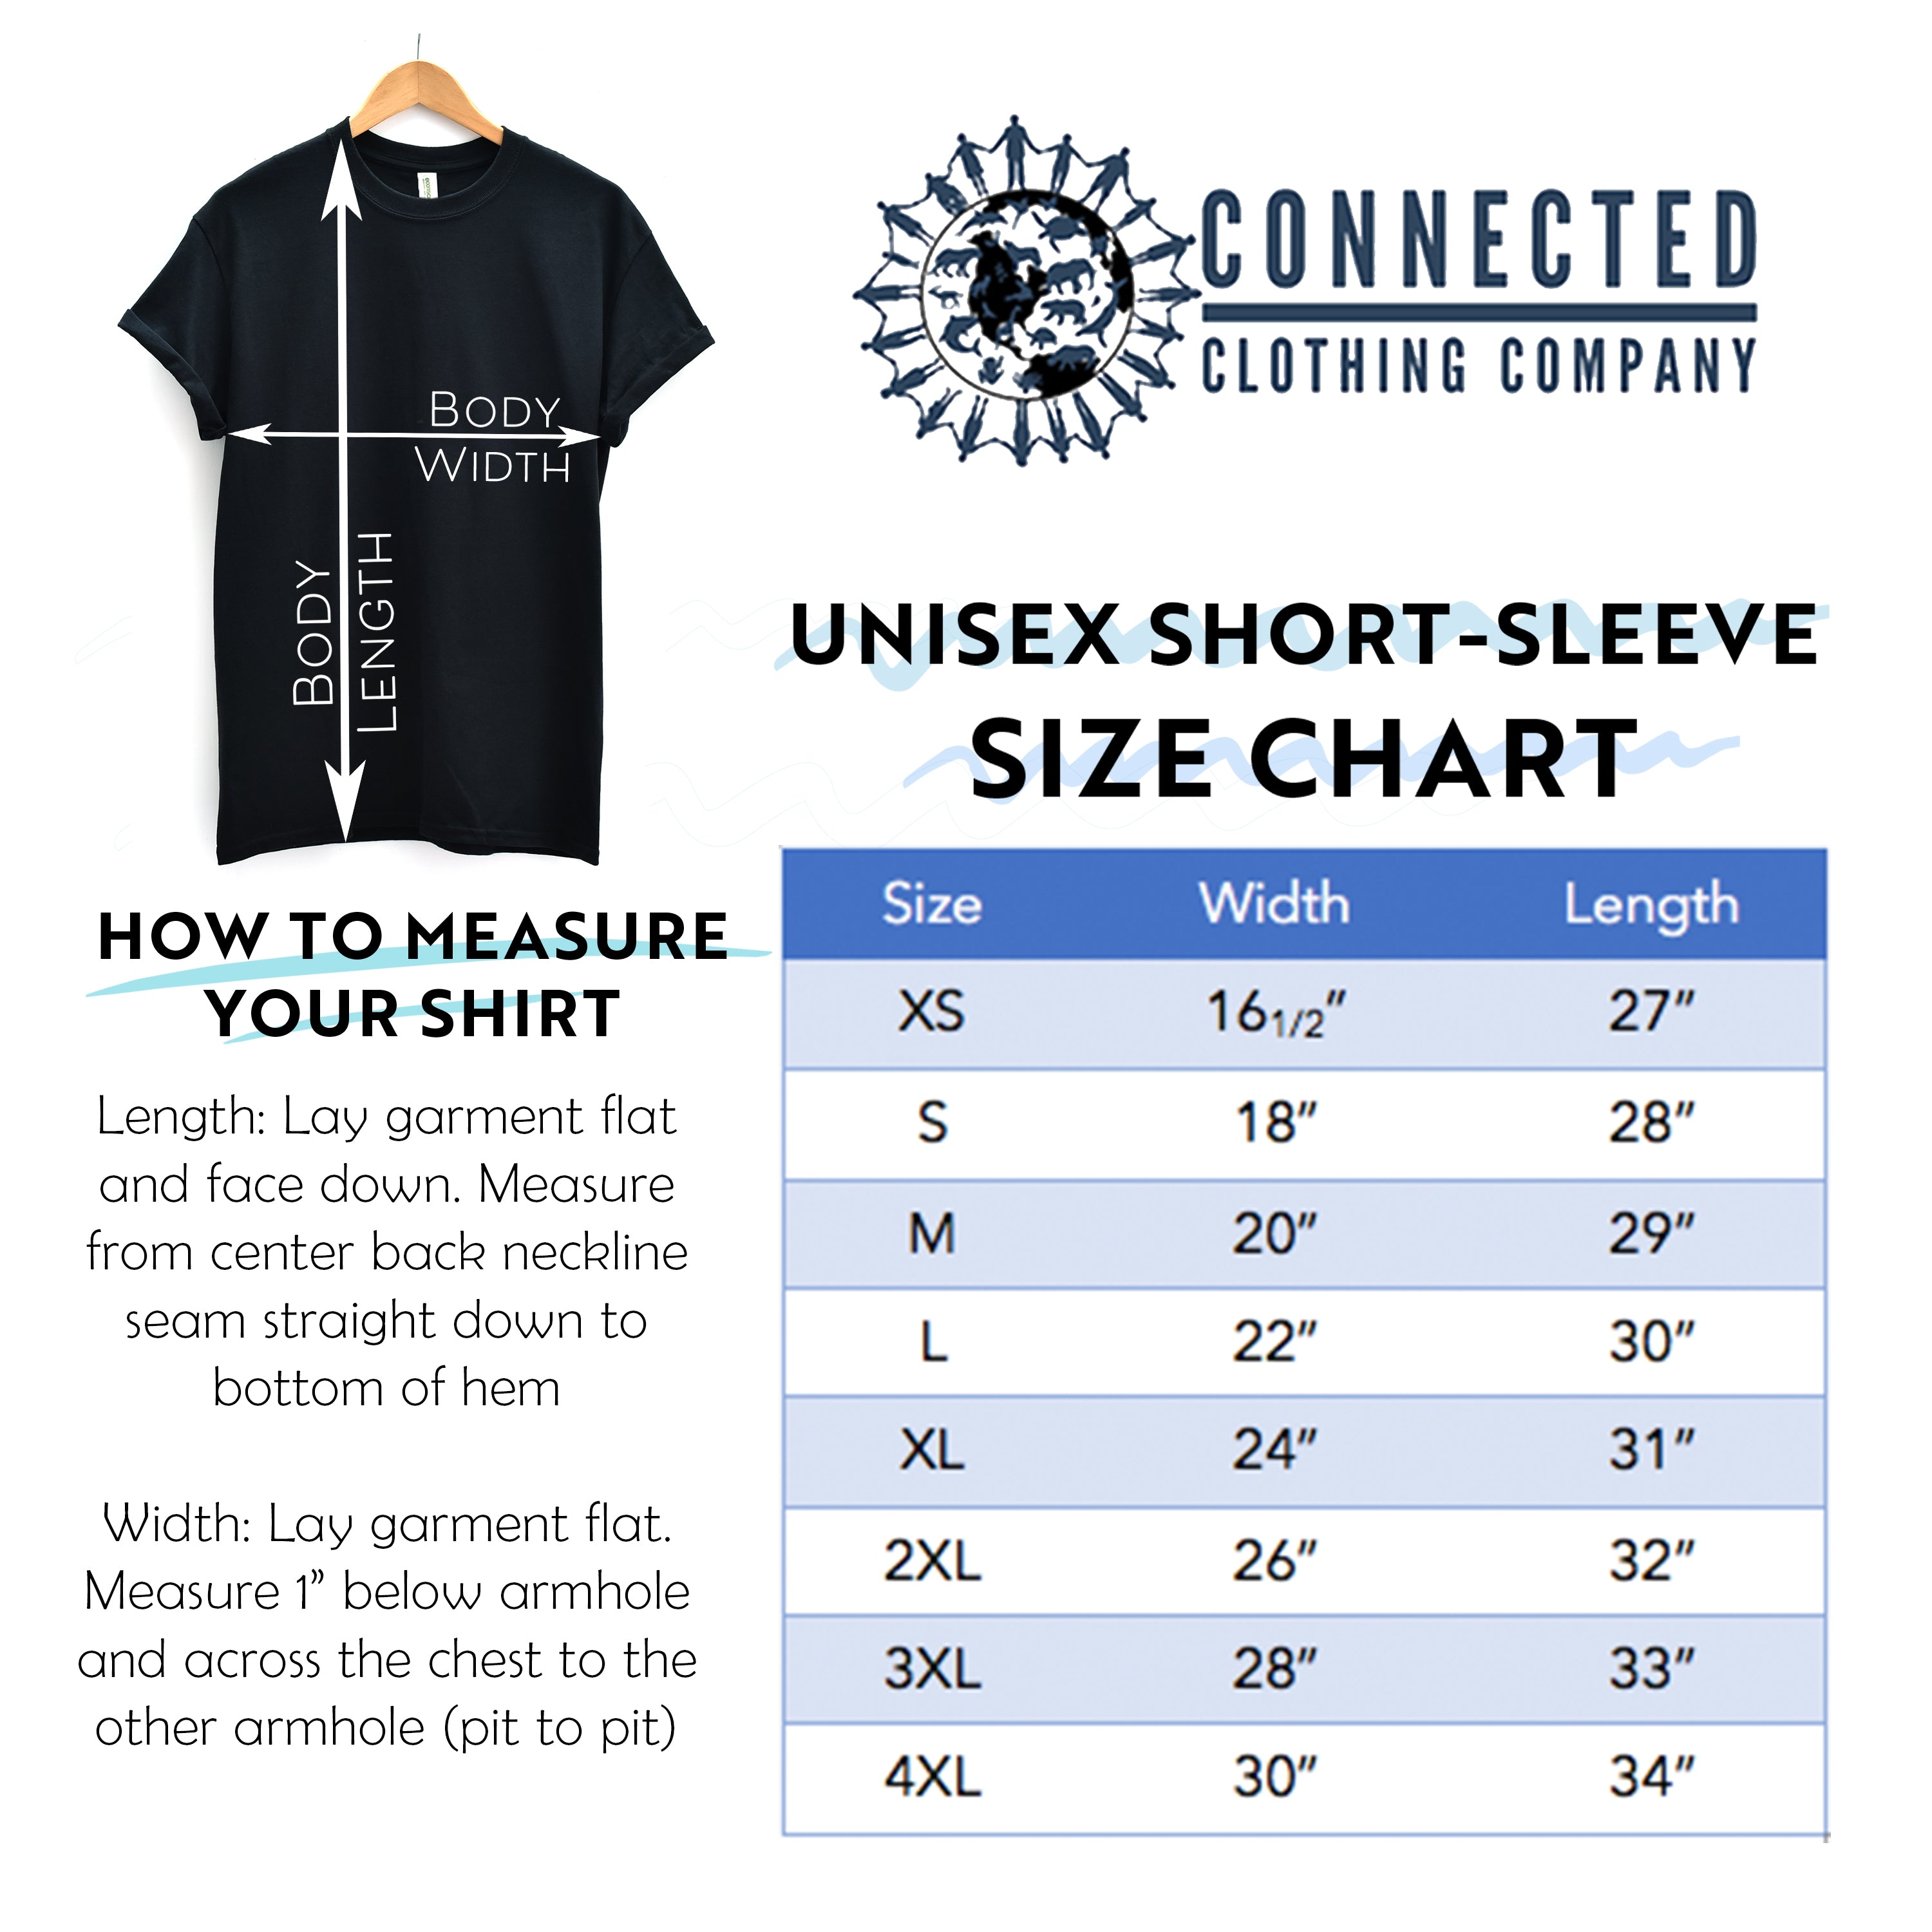 Unisex Short-Sleeve Tee Size Chart - iguanadelabarra - Ethically and Sustainably Made - 10% donated to Mission Blue ocean conservation